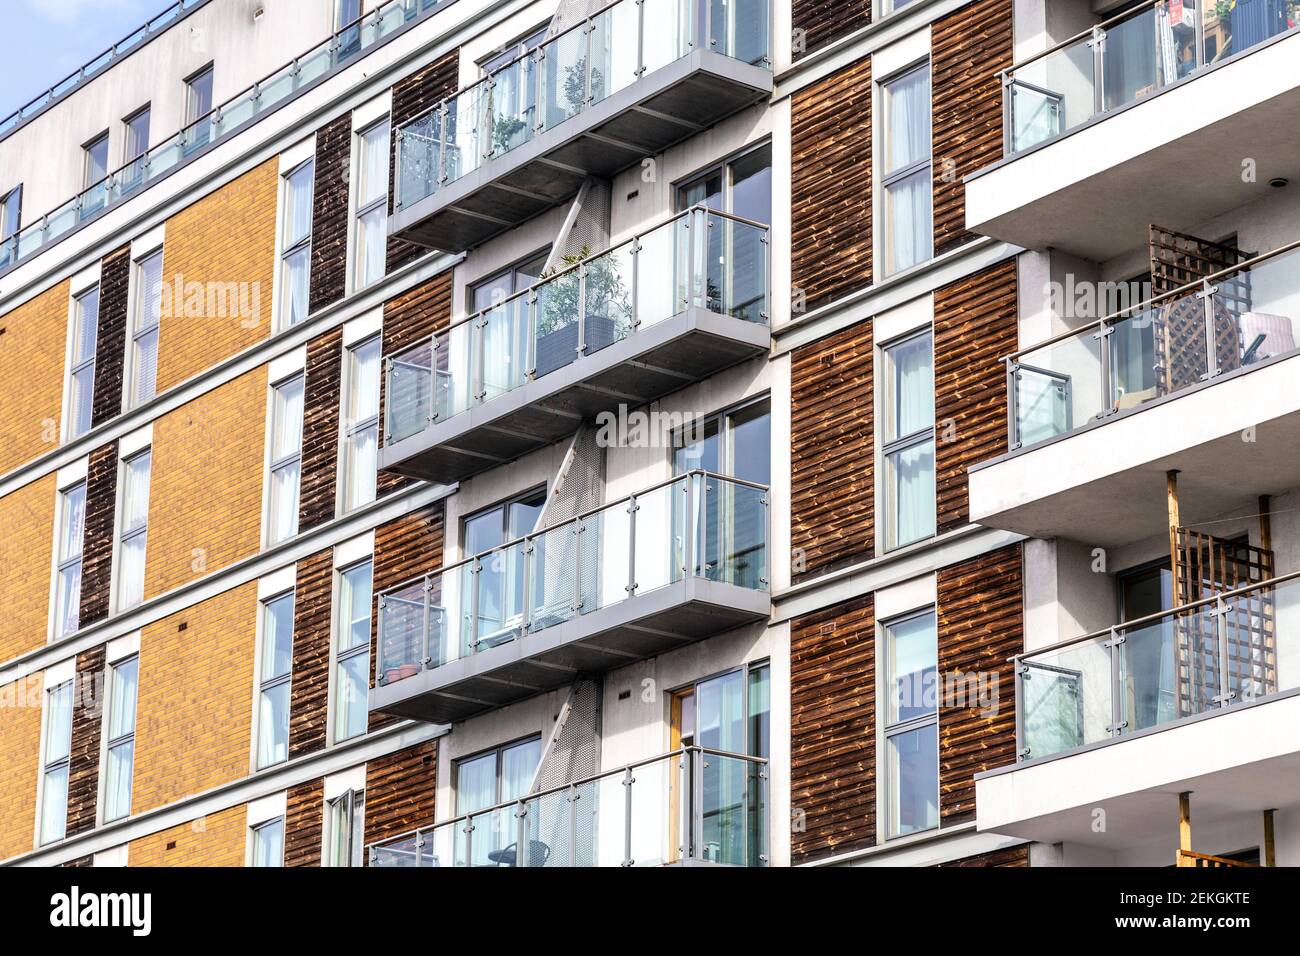 Timber cladding on a residentail building in London, UK Stock Photo